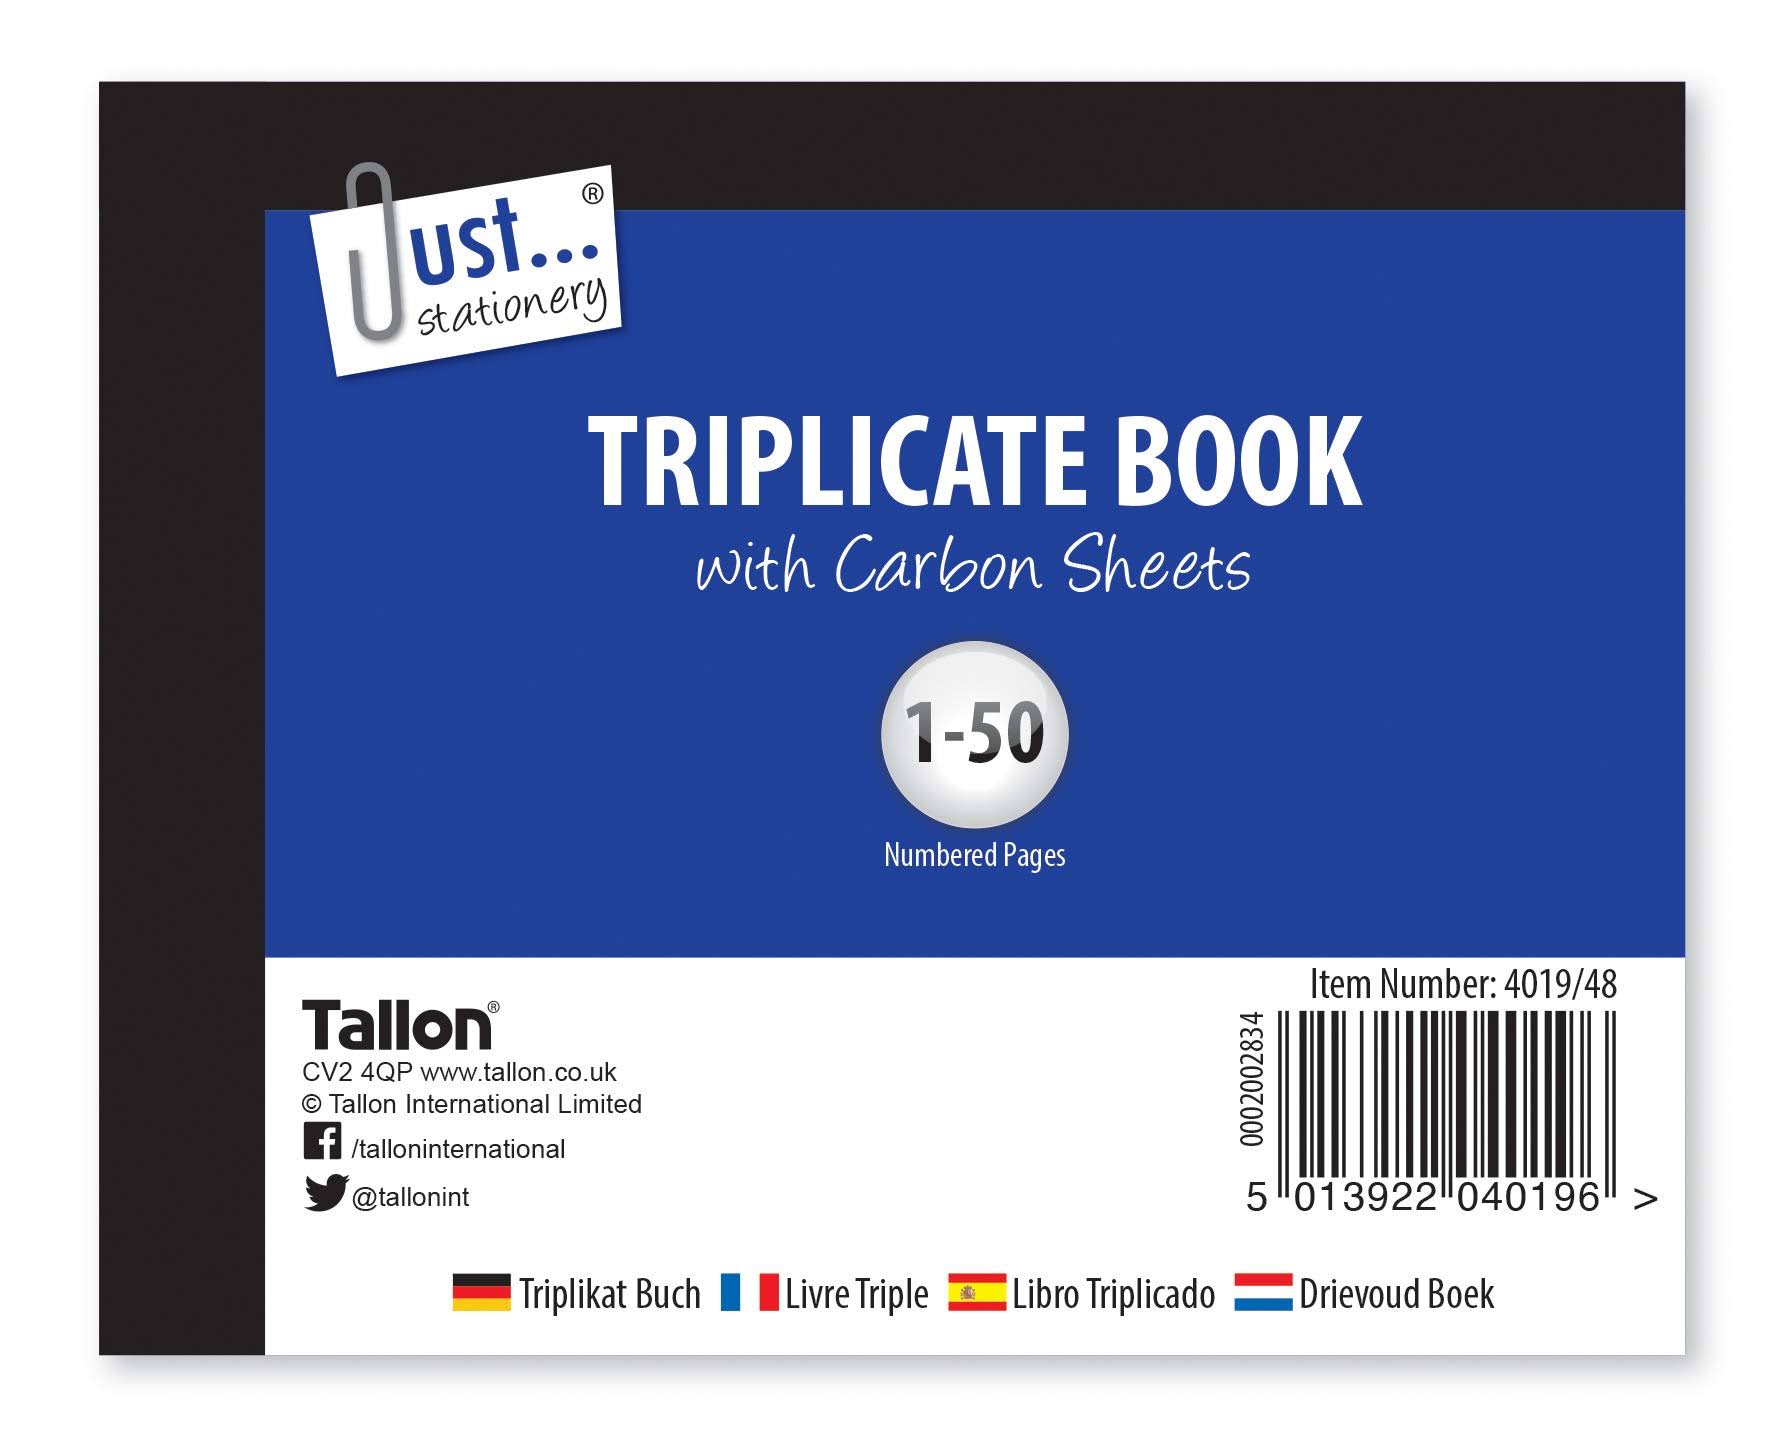 Just Stationery Triplicate Book - 50 Pages Numbered